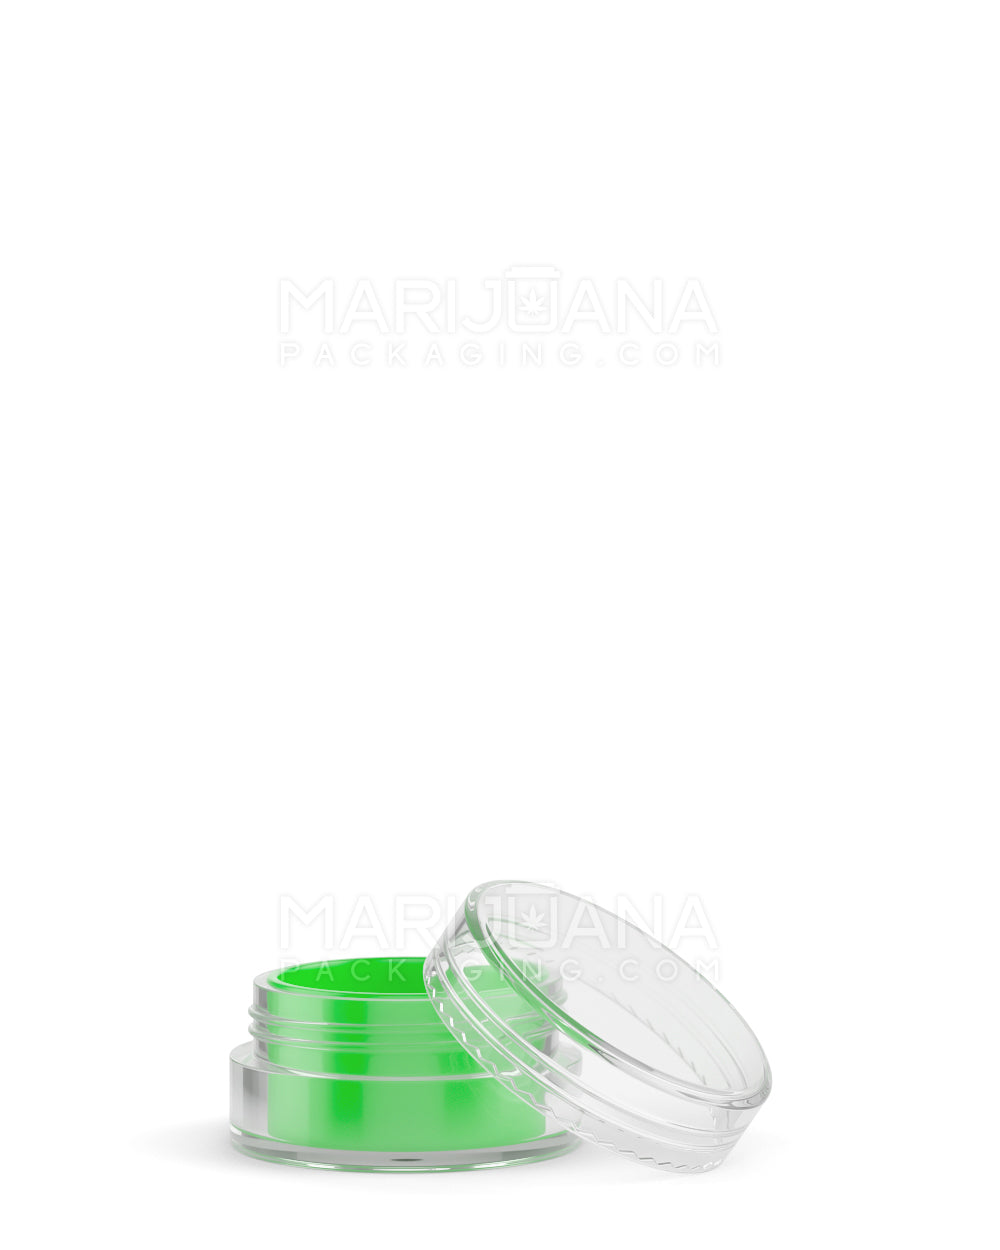 Clear Concentrate Containers w/ Screw Top Cap & Green Silicone Insert | 5mL - Plastic - 100 Count - 1